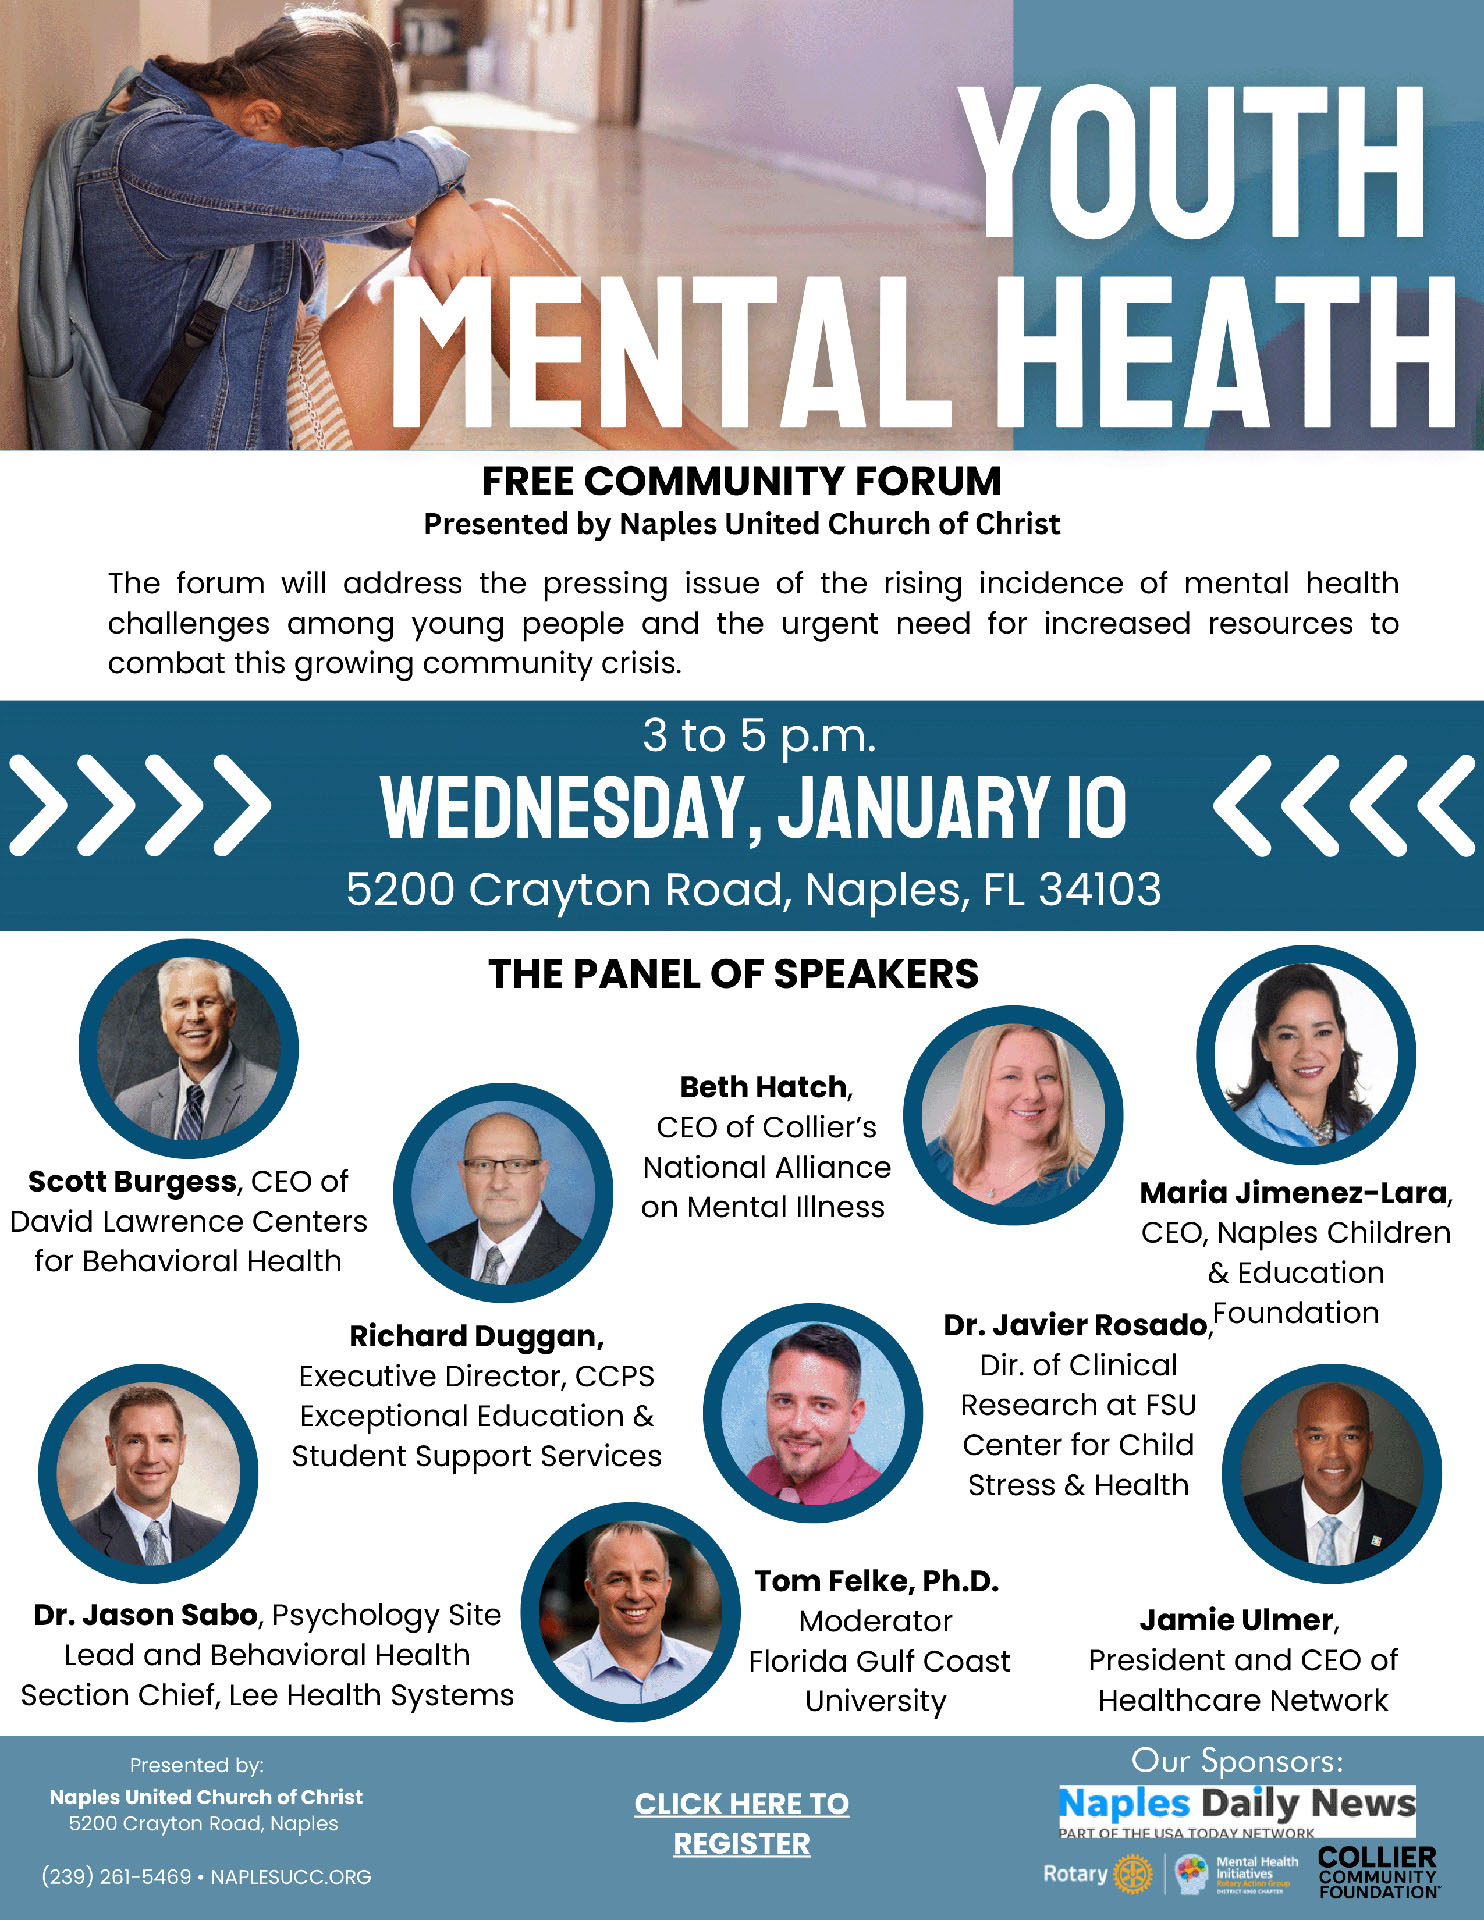 Youth Mental Free Community Forum, Presented by Naples United Church of Christ - 3 to 5 PM on Wednesday, January 10th, on 5200 Crayton Road, Naples, FL, 34103